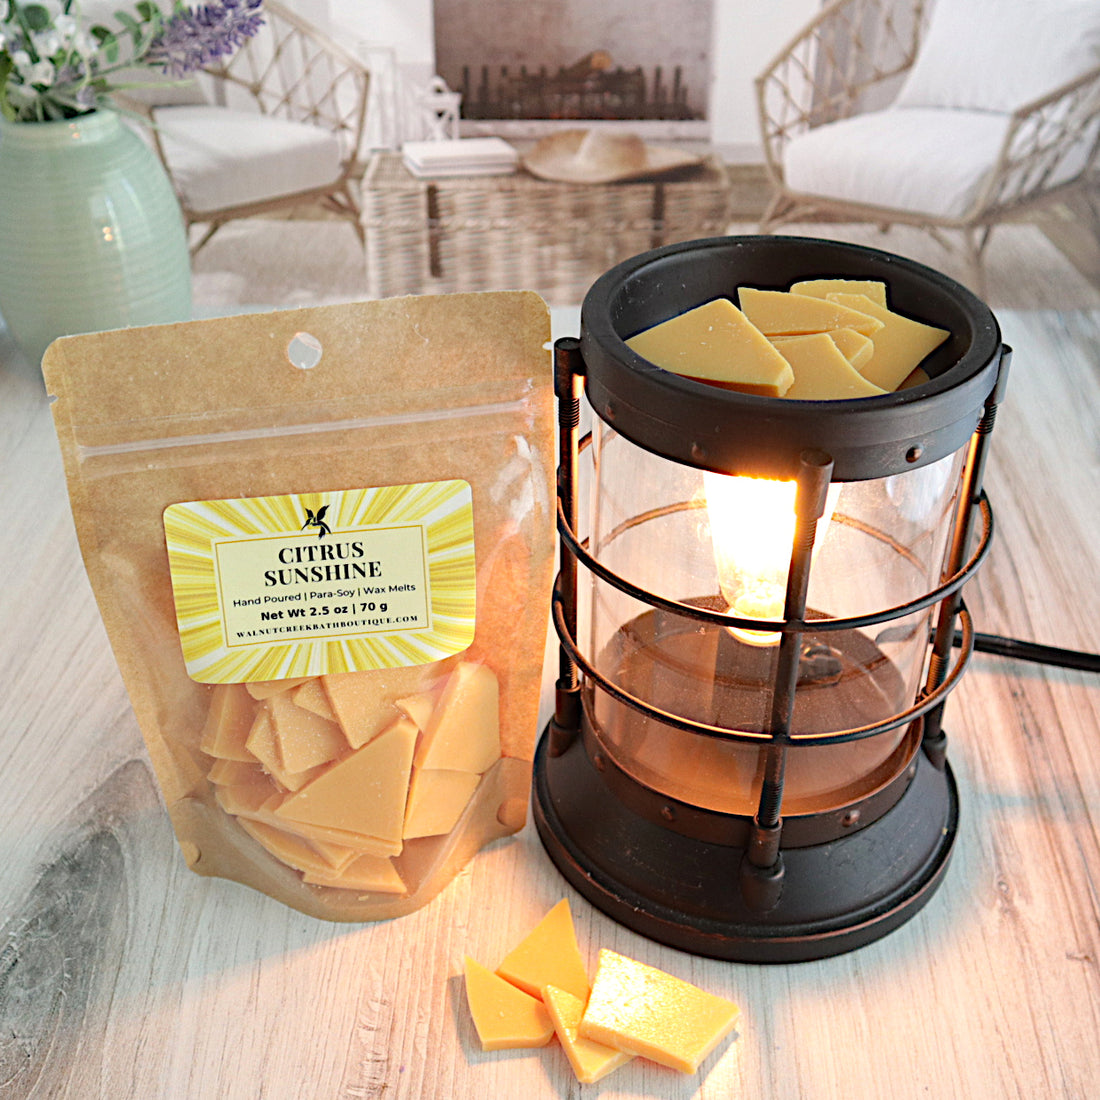 citrus sunshine is a pretty orange sparkly wax melt shown here in a bag with a fun sunshine beam label.  it is standing next to a lit burner full of the shard type pieces of wax. along the bottom of the burner are more pieces strewn about. this is all sitting on a washed out wooden base with a couple of chairs in the background next to a fireplace